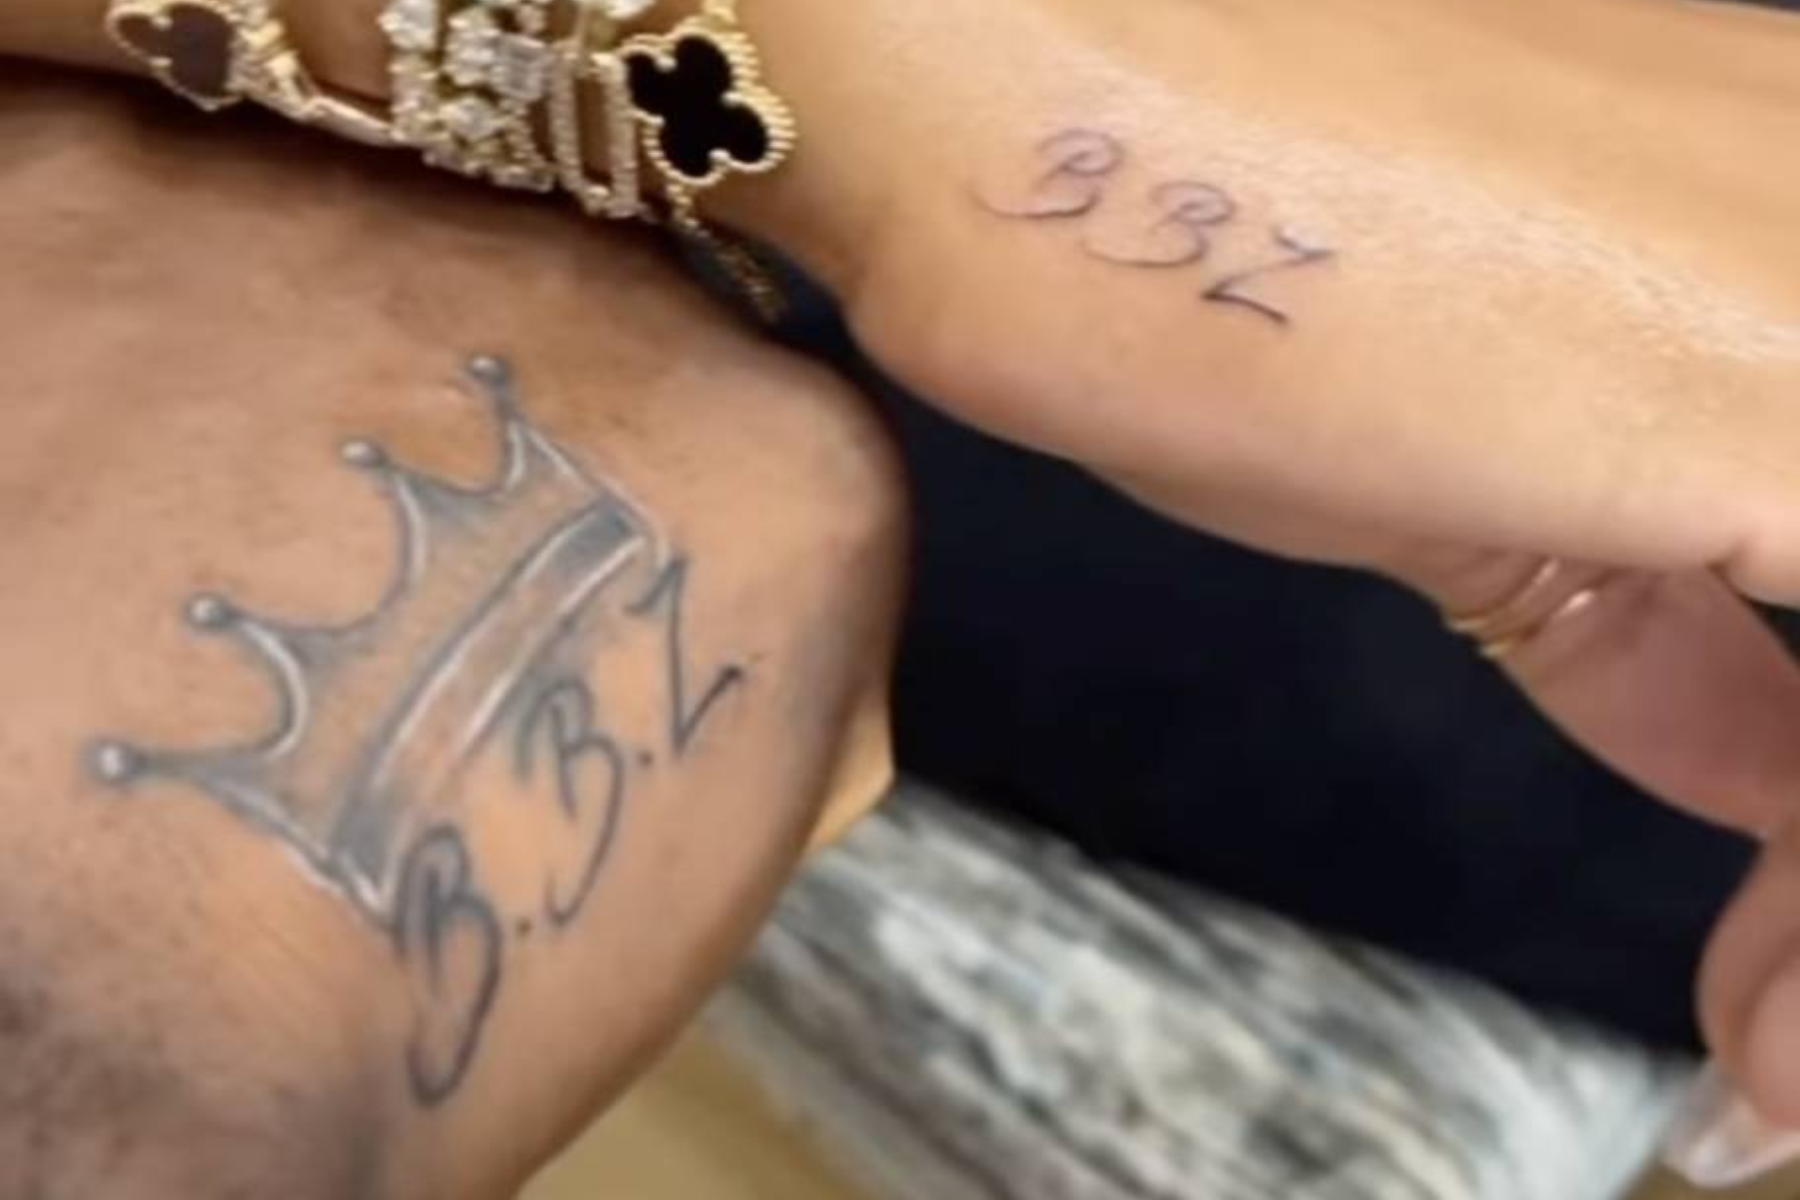 LeBron James has a BBZ tattoo under his crown tattoo on his arm